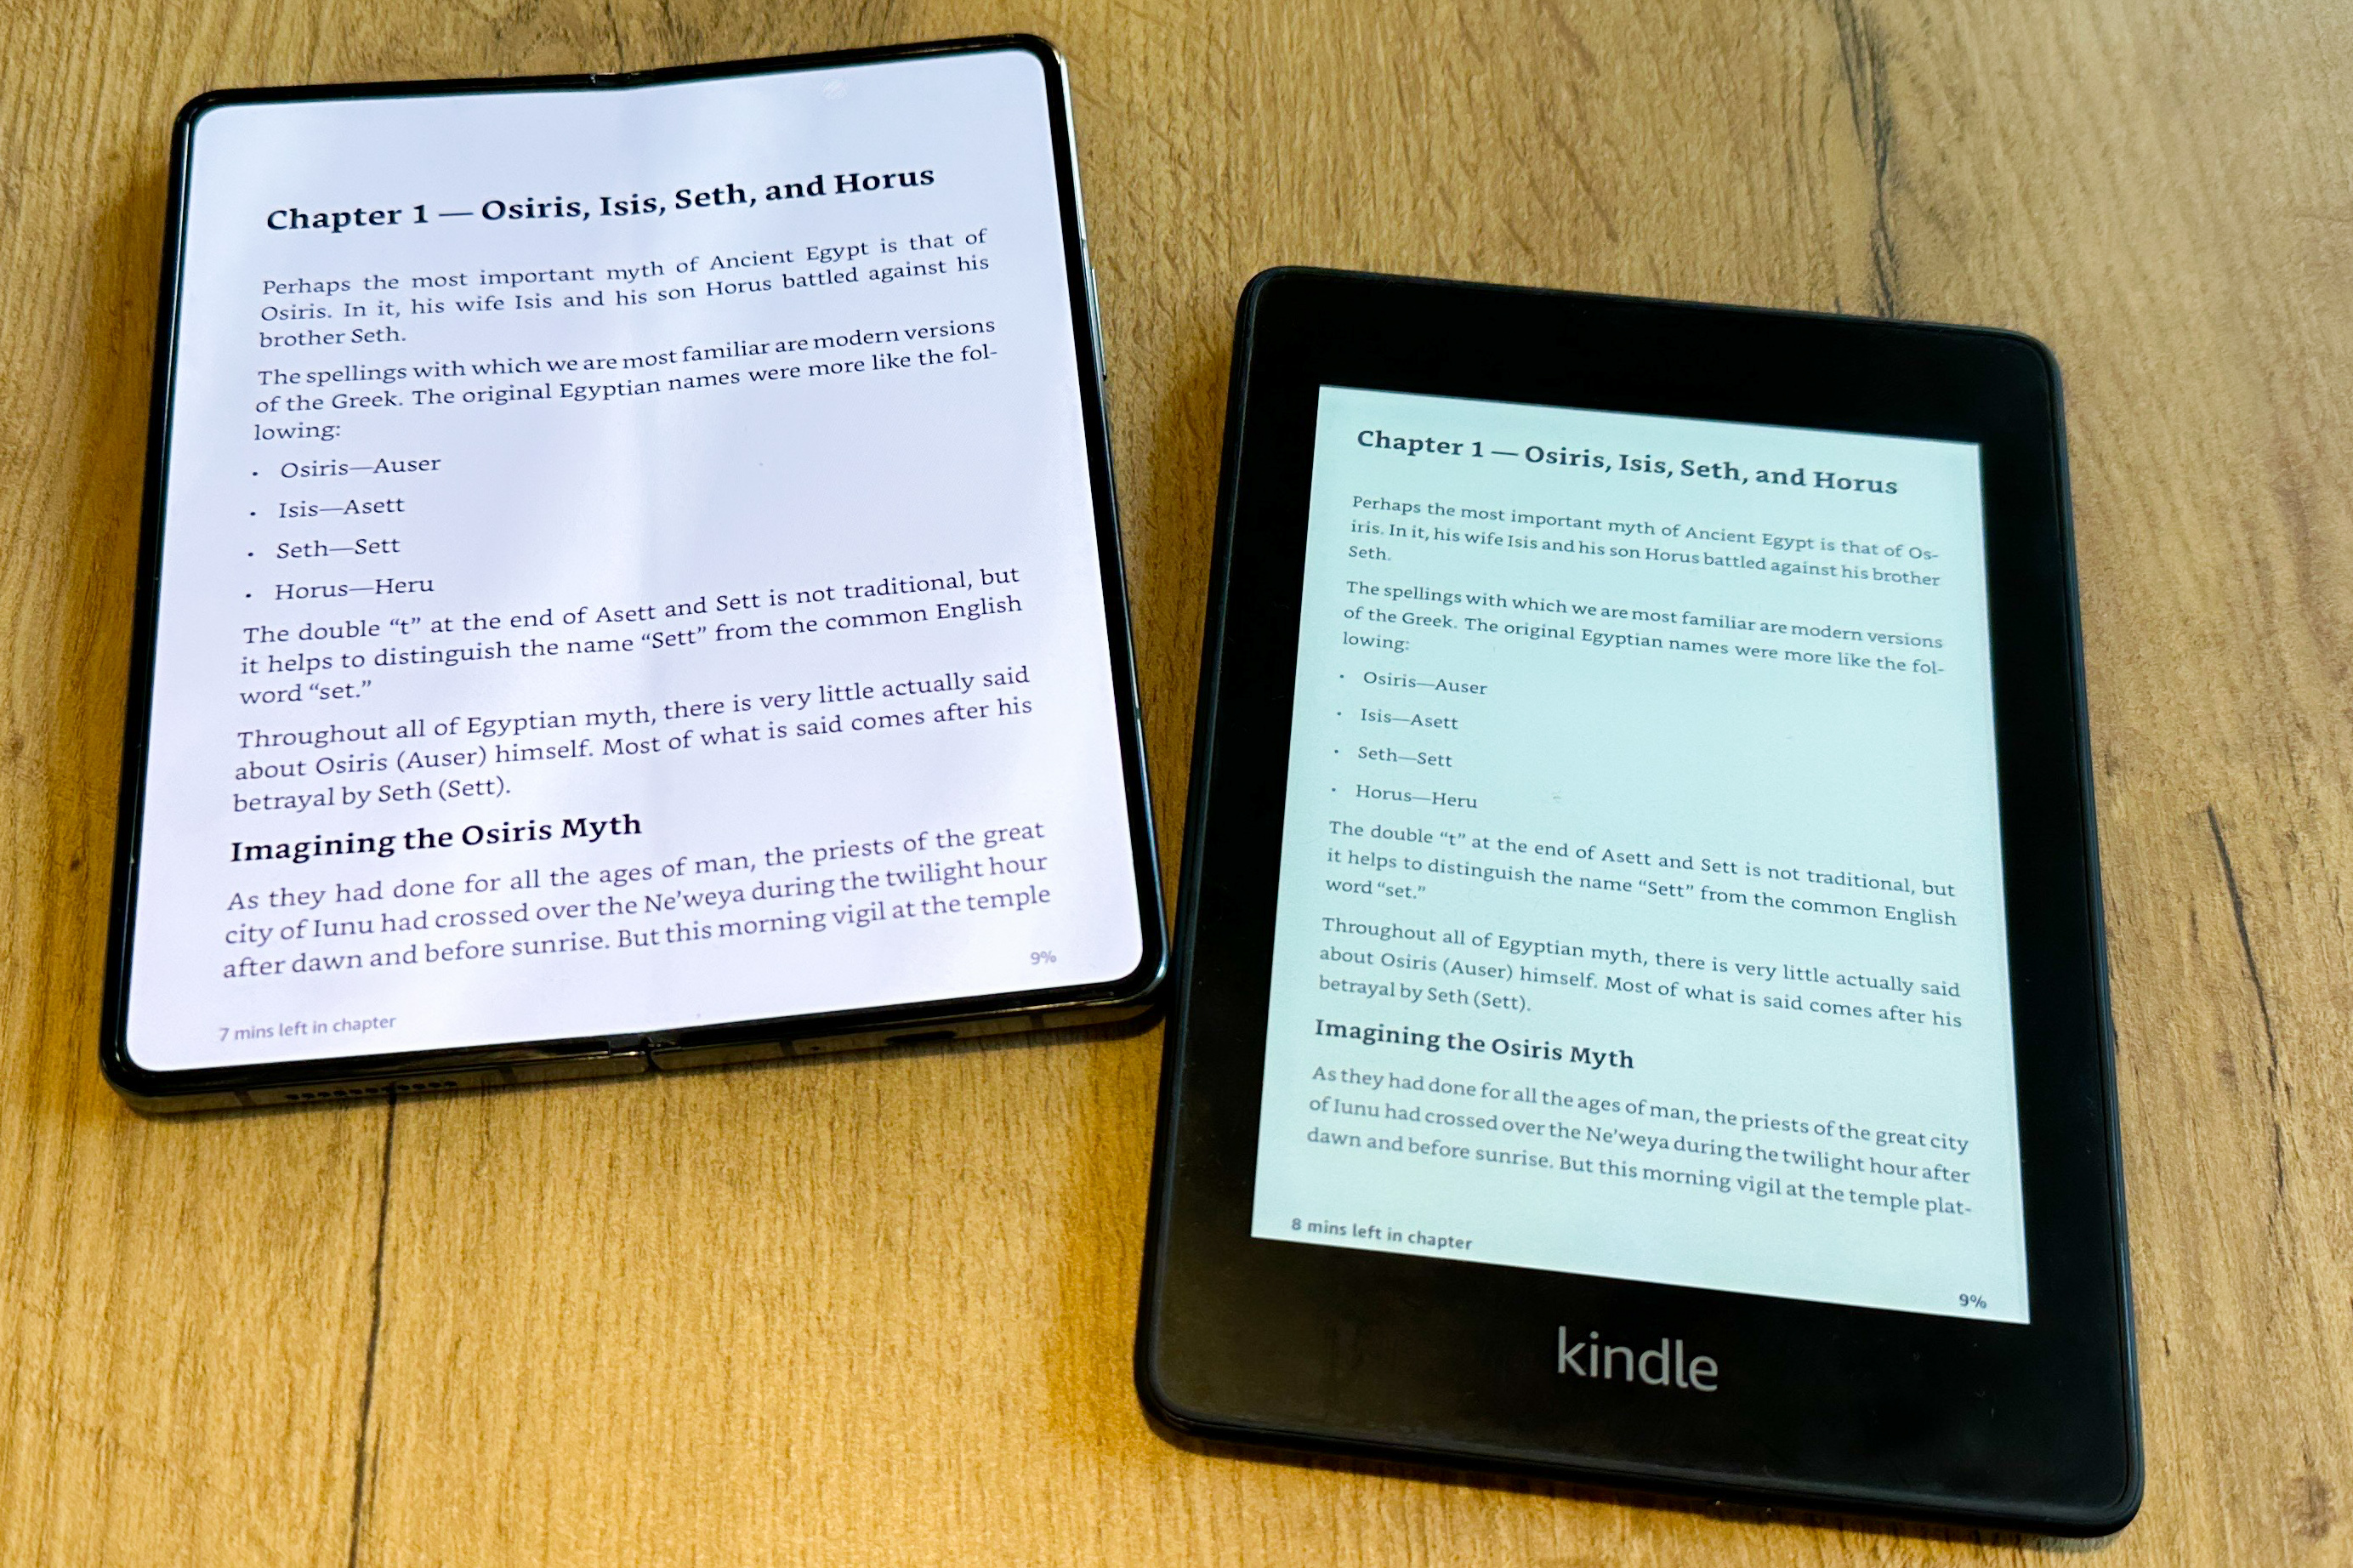 The  Kindle Oasis looks shockingly different